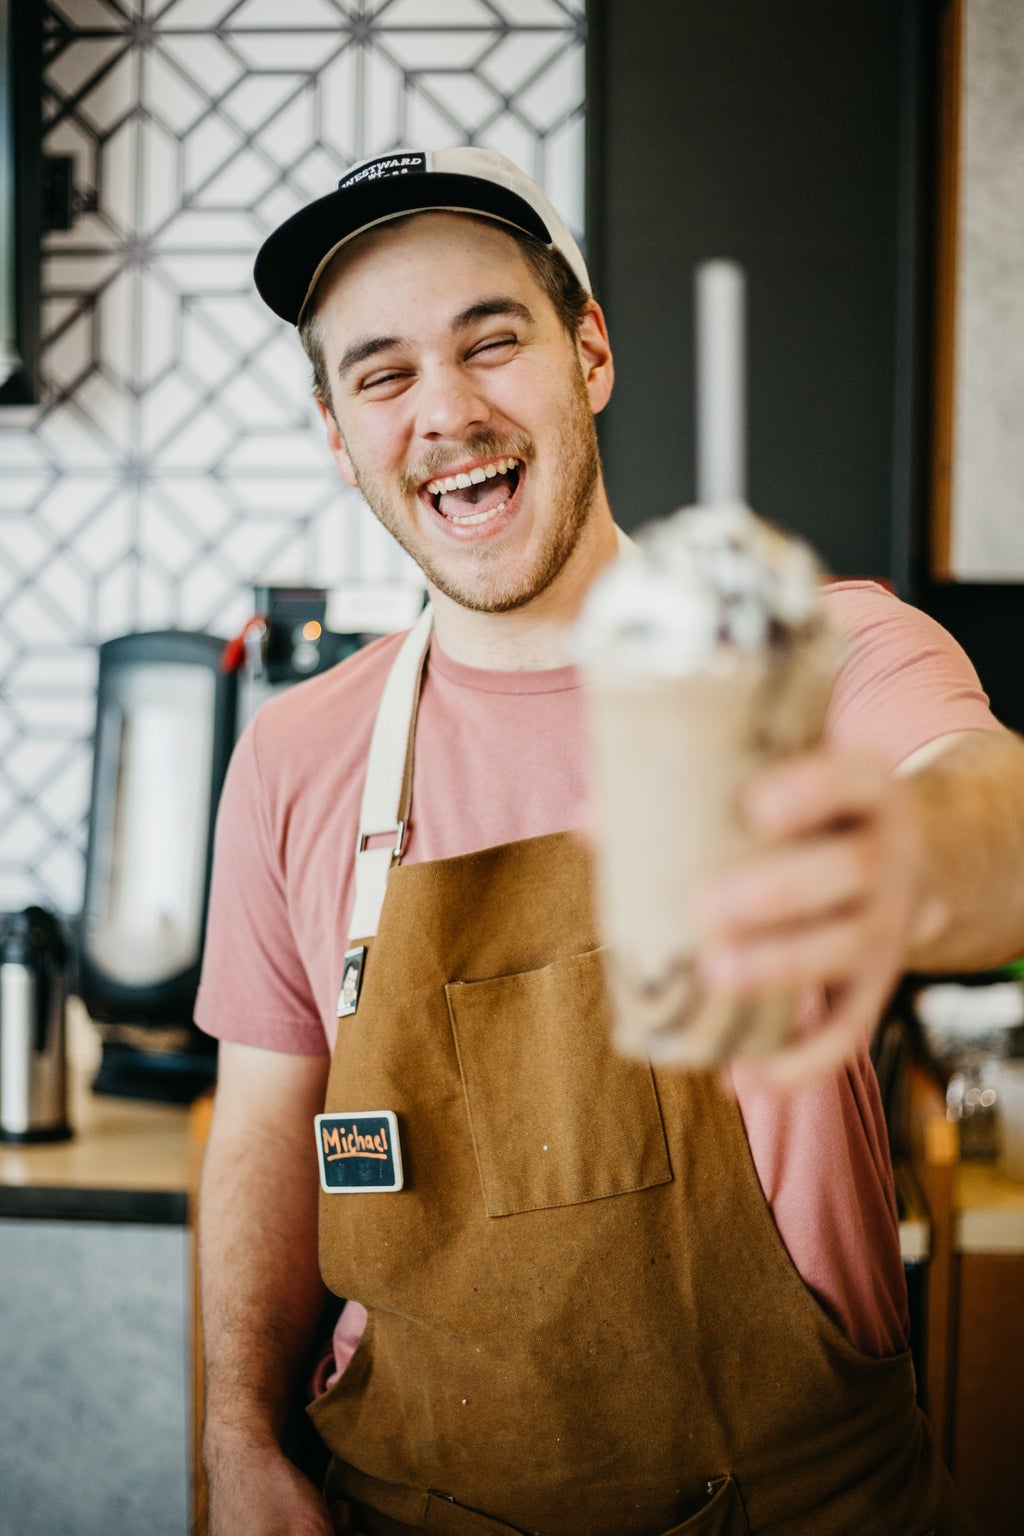 Man holding a smoothie and smiling.